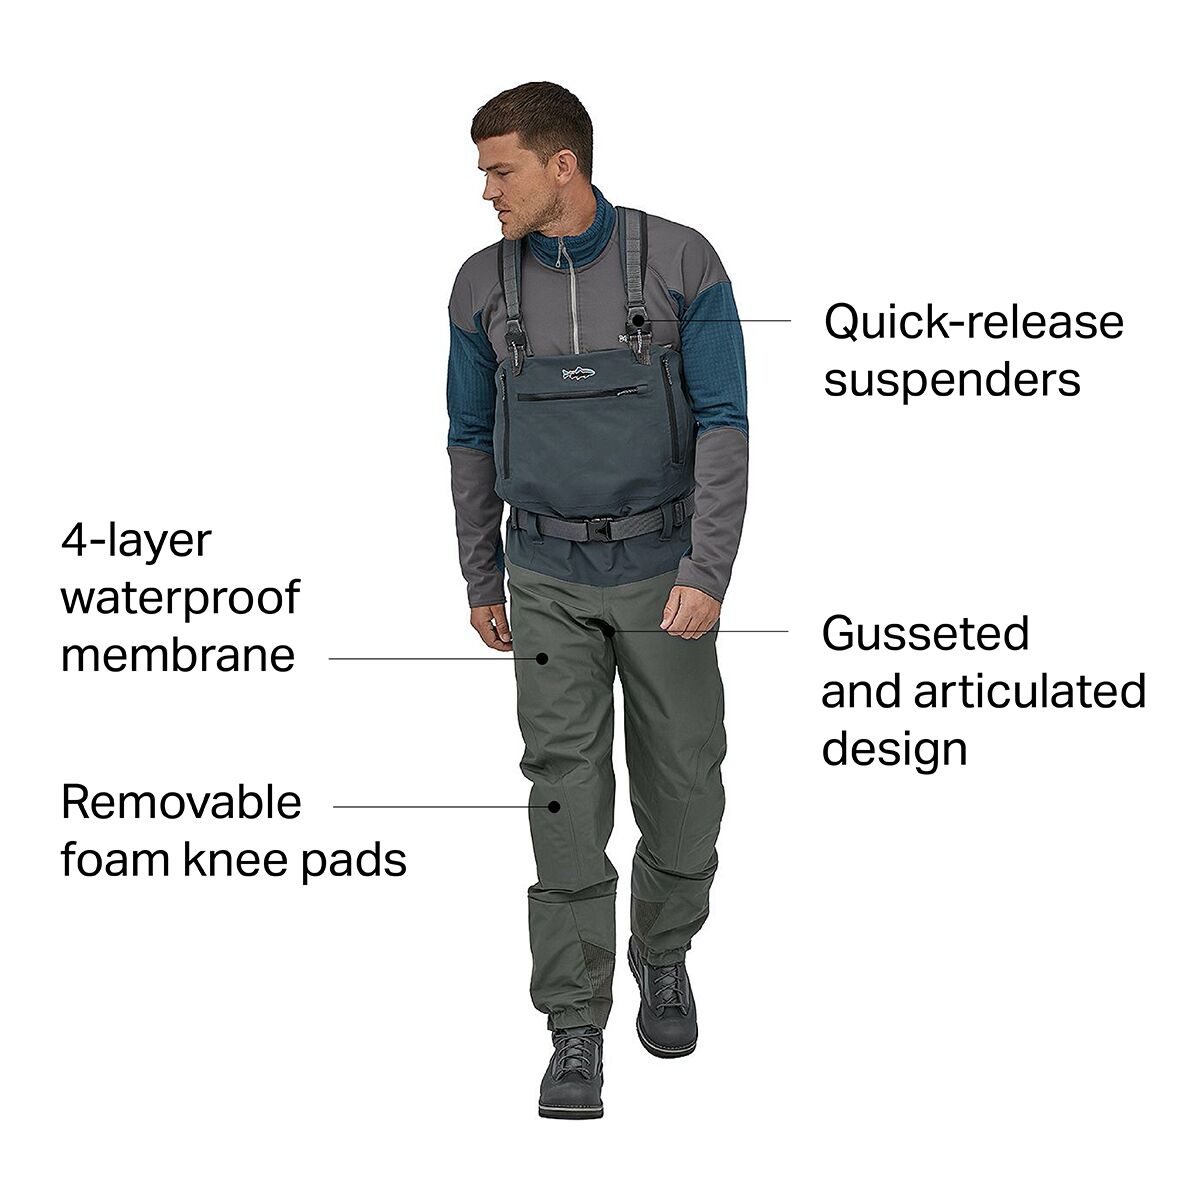 Patagonia Introduces Women's and Men's Swiftcurrent Waders – The Venturing  Angler